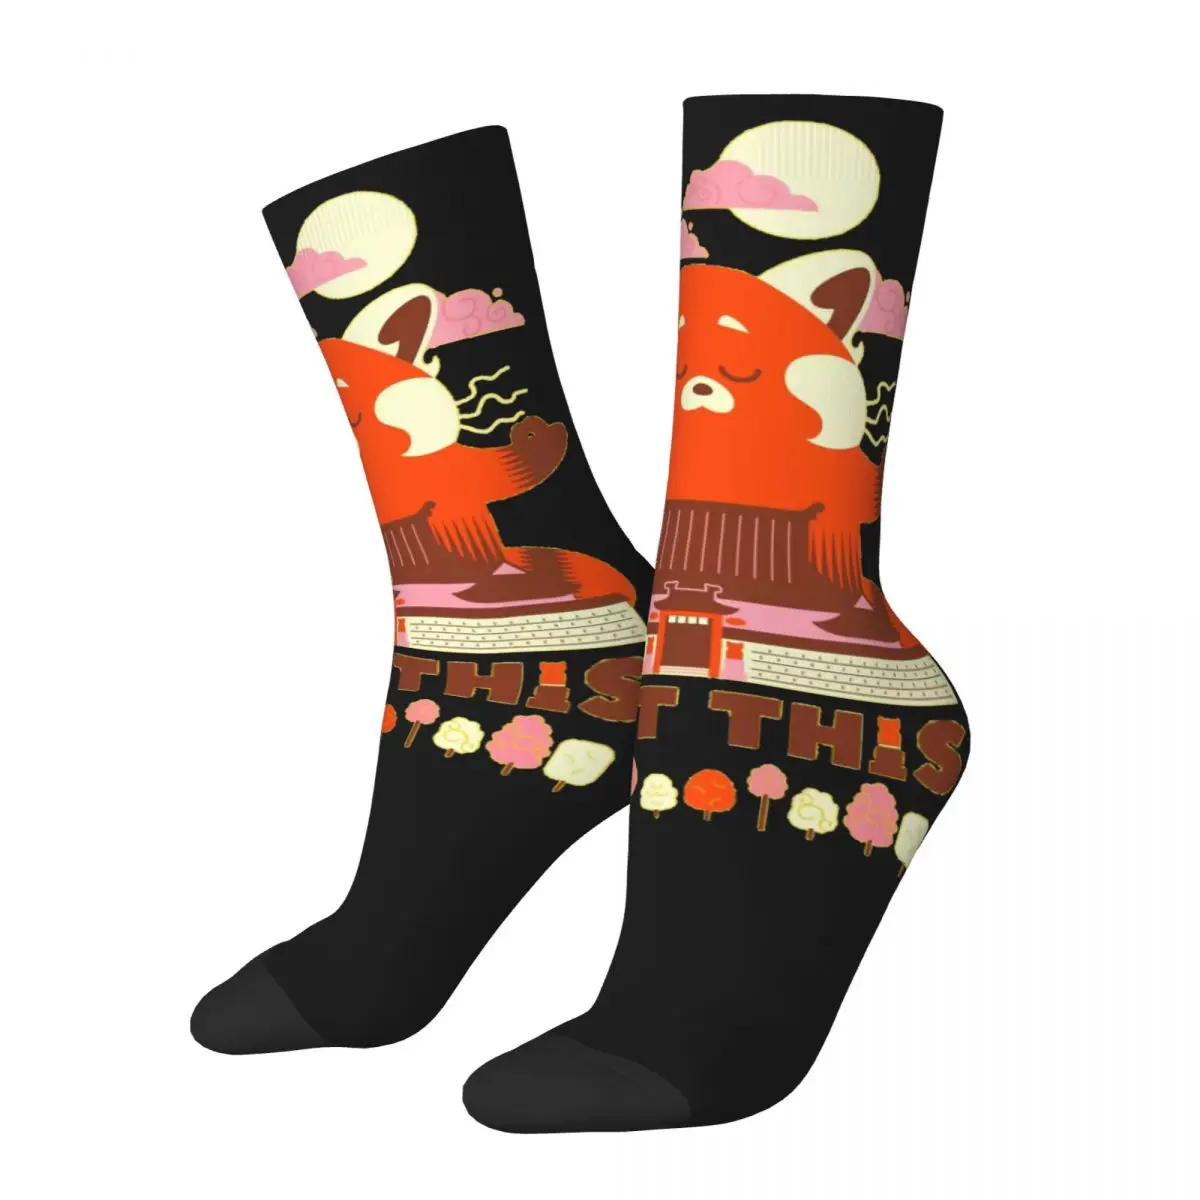 

Funny Happy Men's compression Socks I Got This Retro Harajuku Turning Red Meilin Film Hip Hop Novelty Casual Crew Crazy Sock